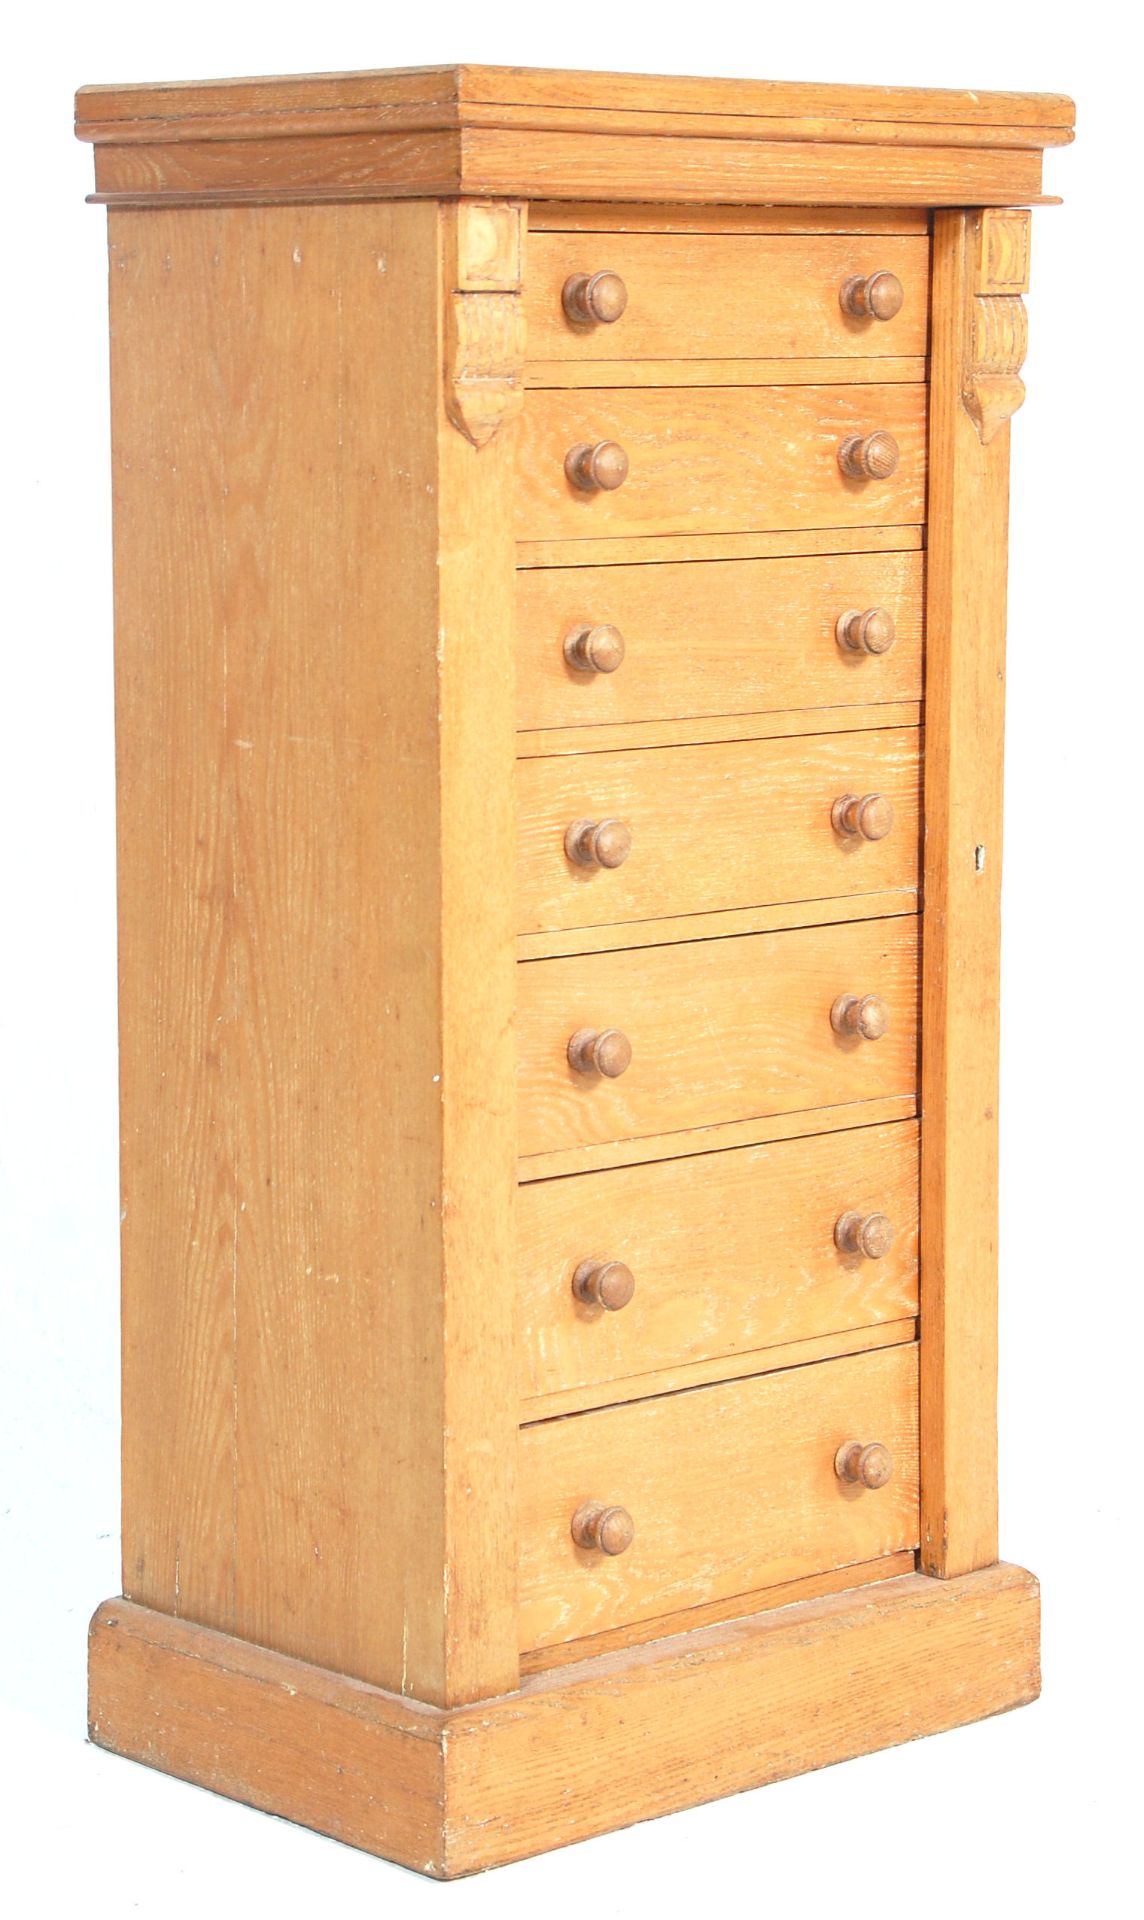 A 19th Century Victorian light oak Wellington chest of drawers. Raised on a plinth base with an